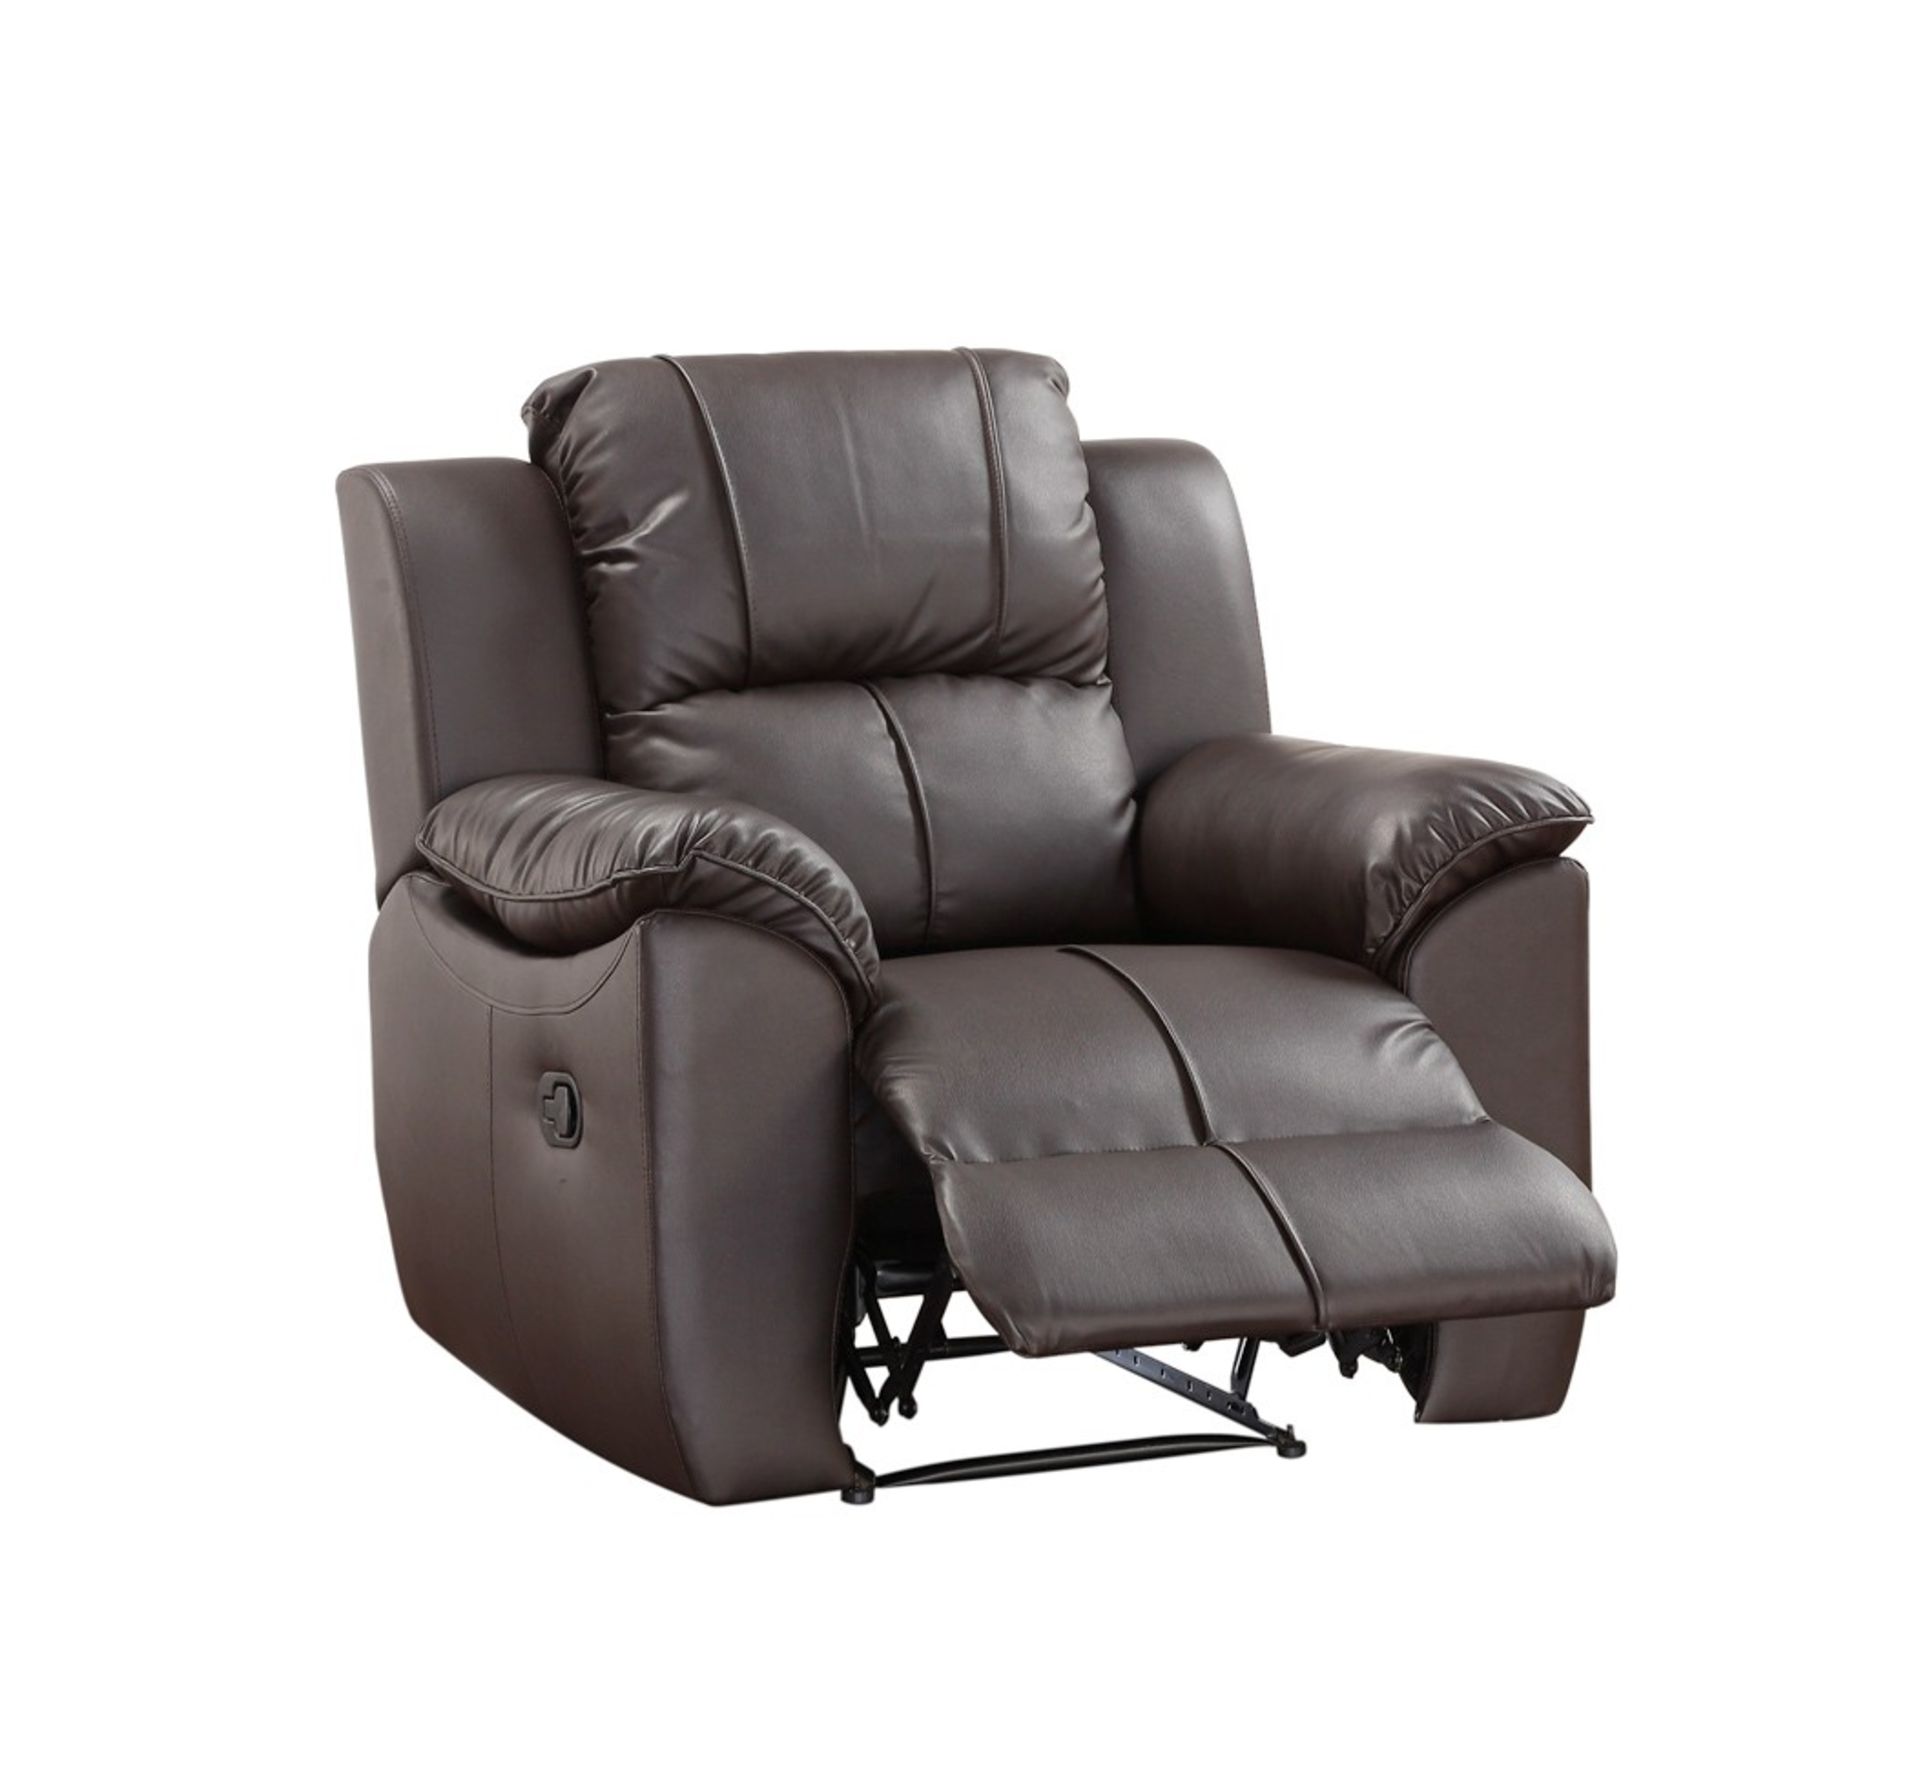 Brand New and Boxed Recliner Armchair (Brown) RRP